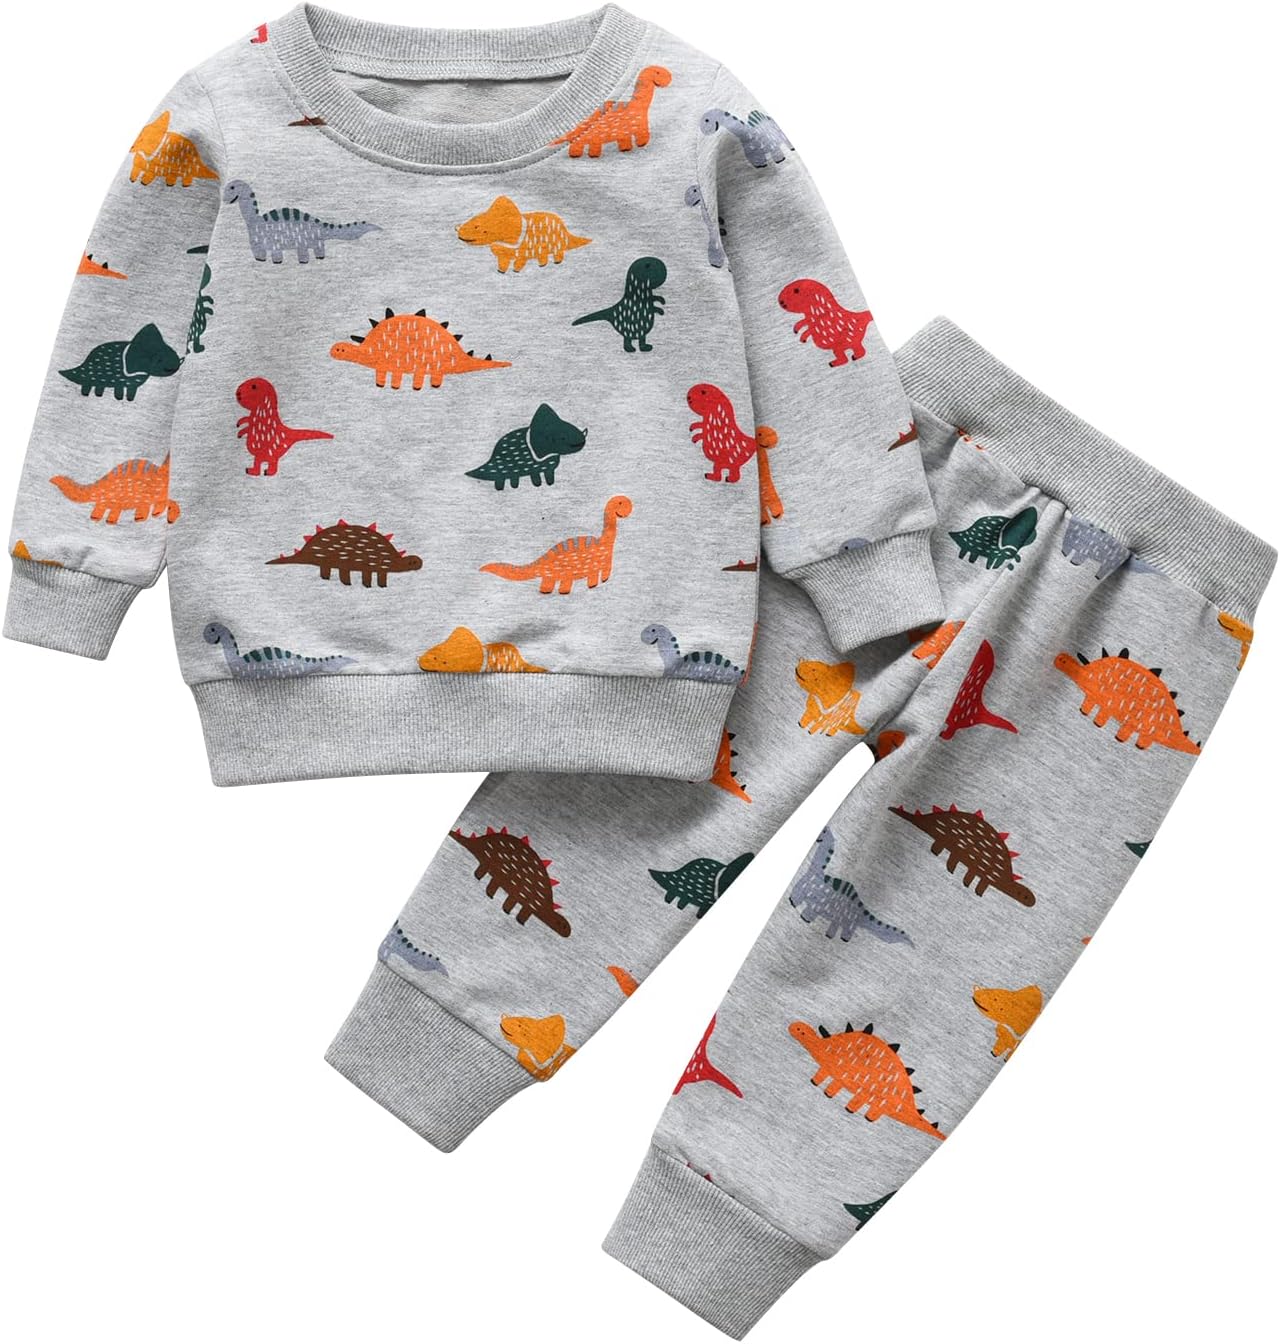 Toddler Baby Boy Clothes Animal Style Long Sleeve Tops Sweatsuit Pants Outfits Set